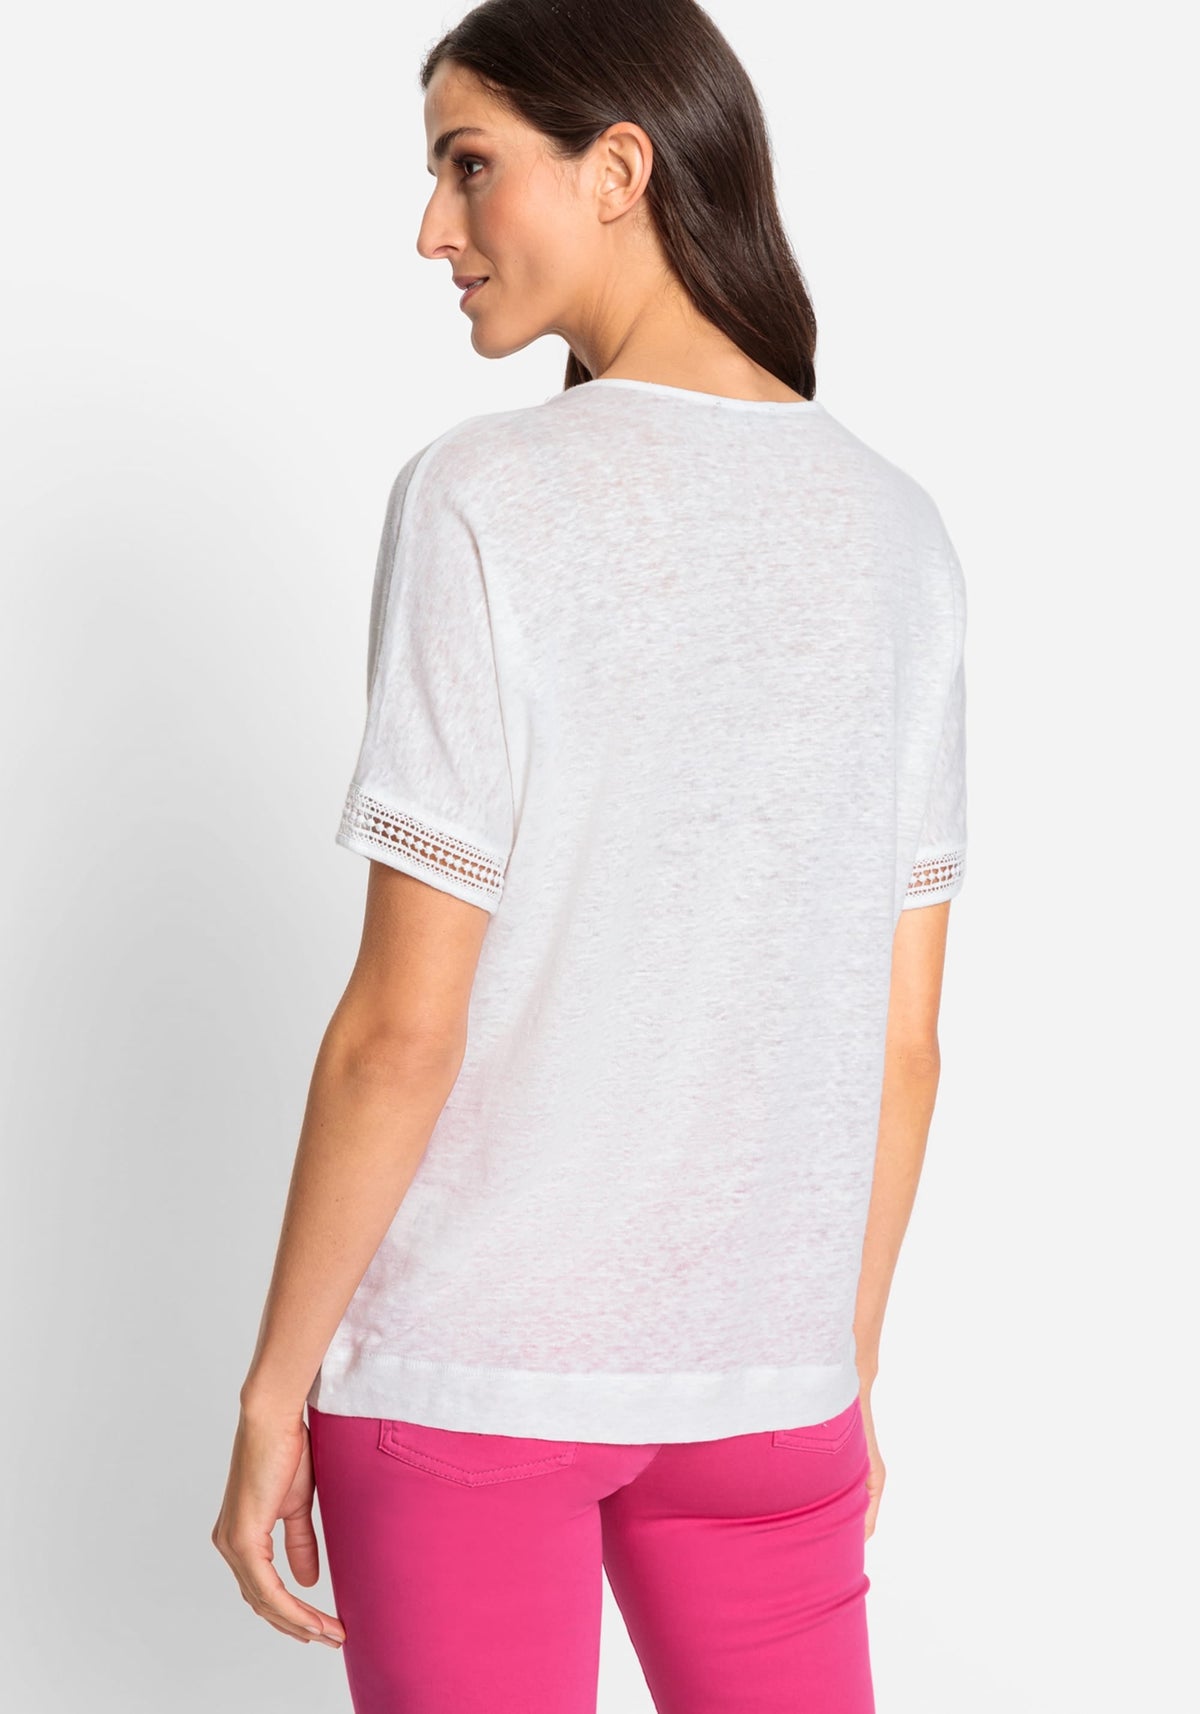 100% Linen Short Sleeve T-Shirt with Lace Trim